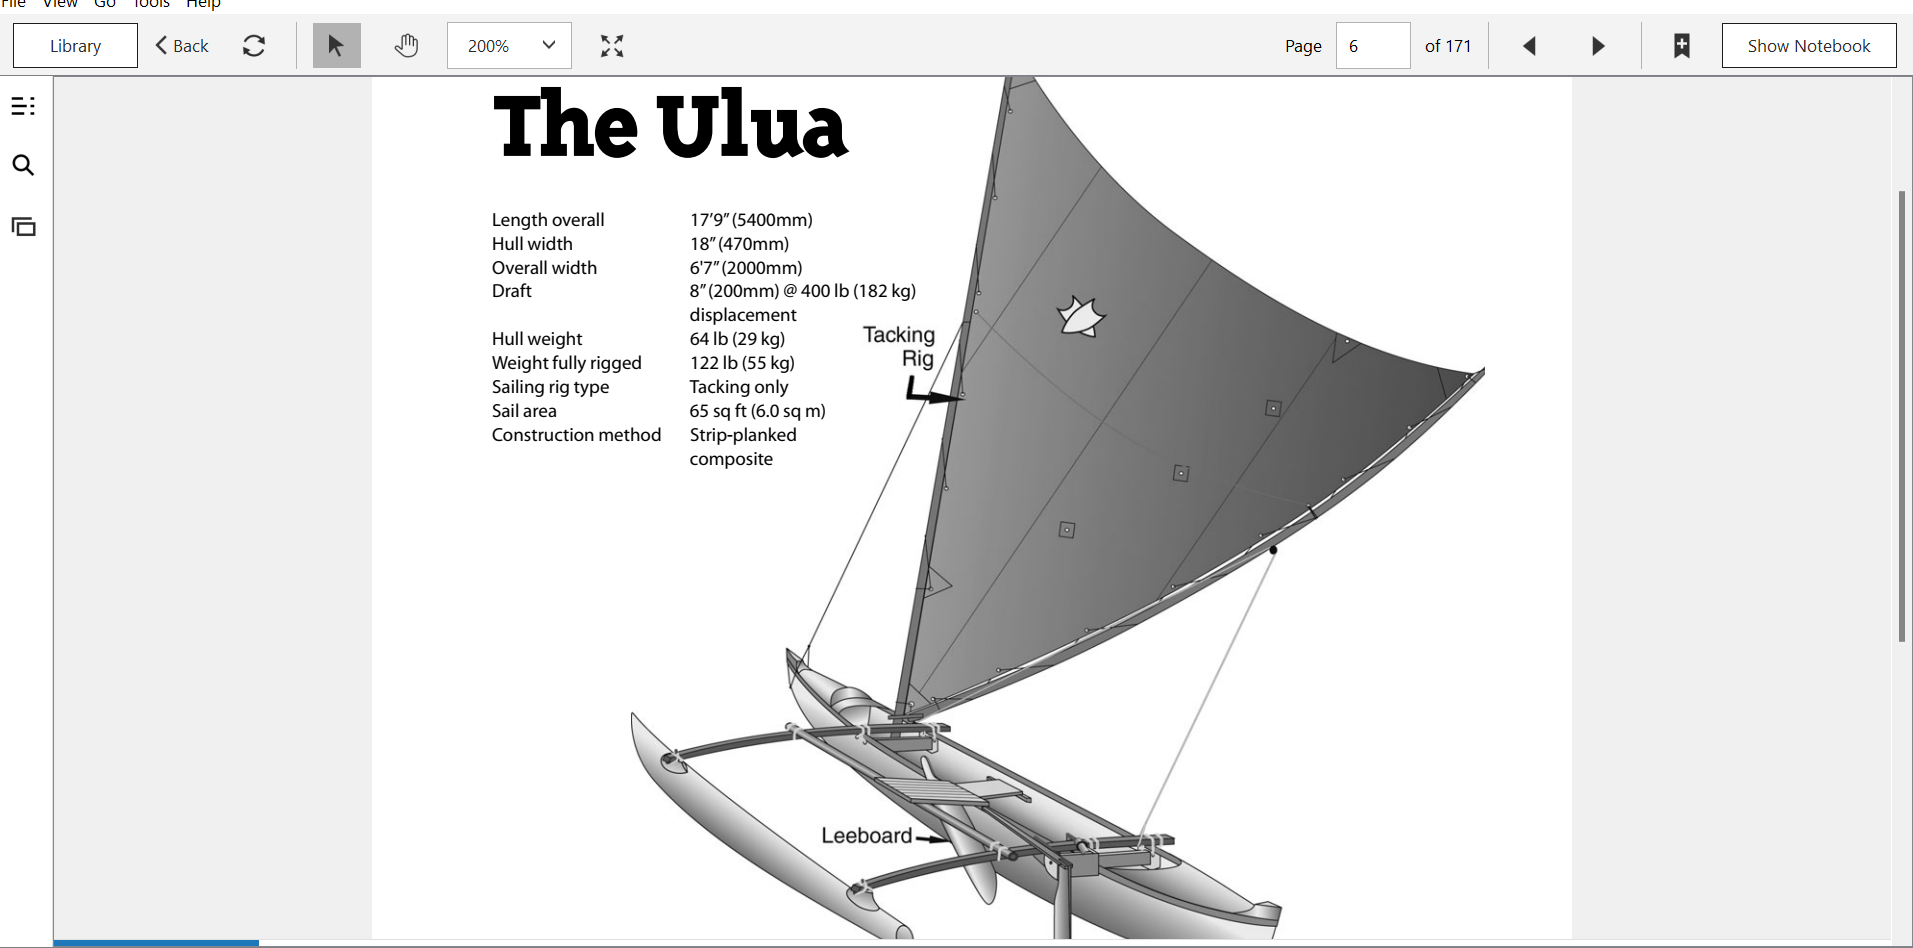 Ulua page from book edited.png